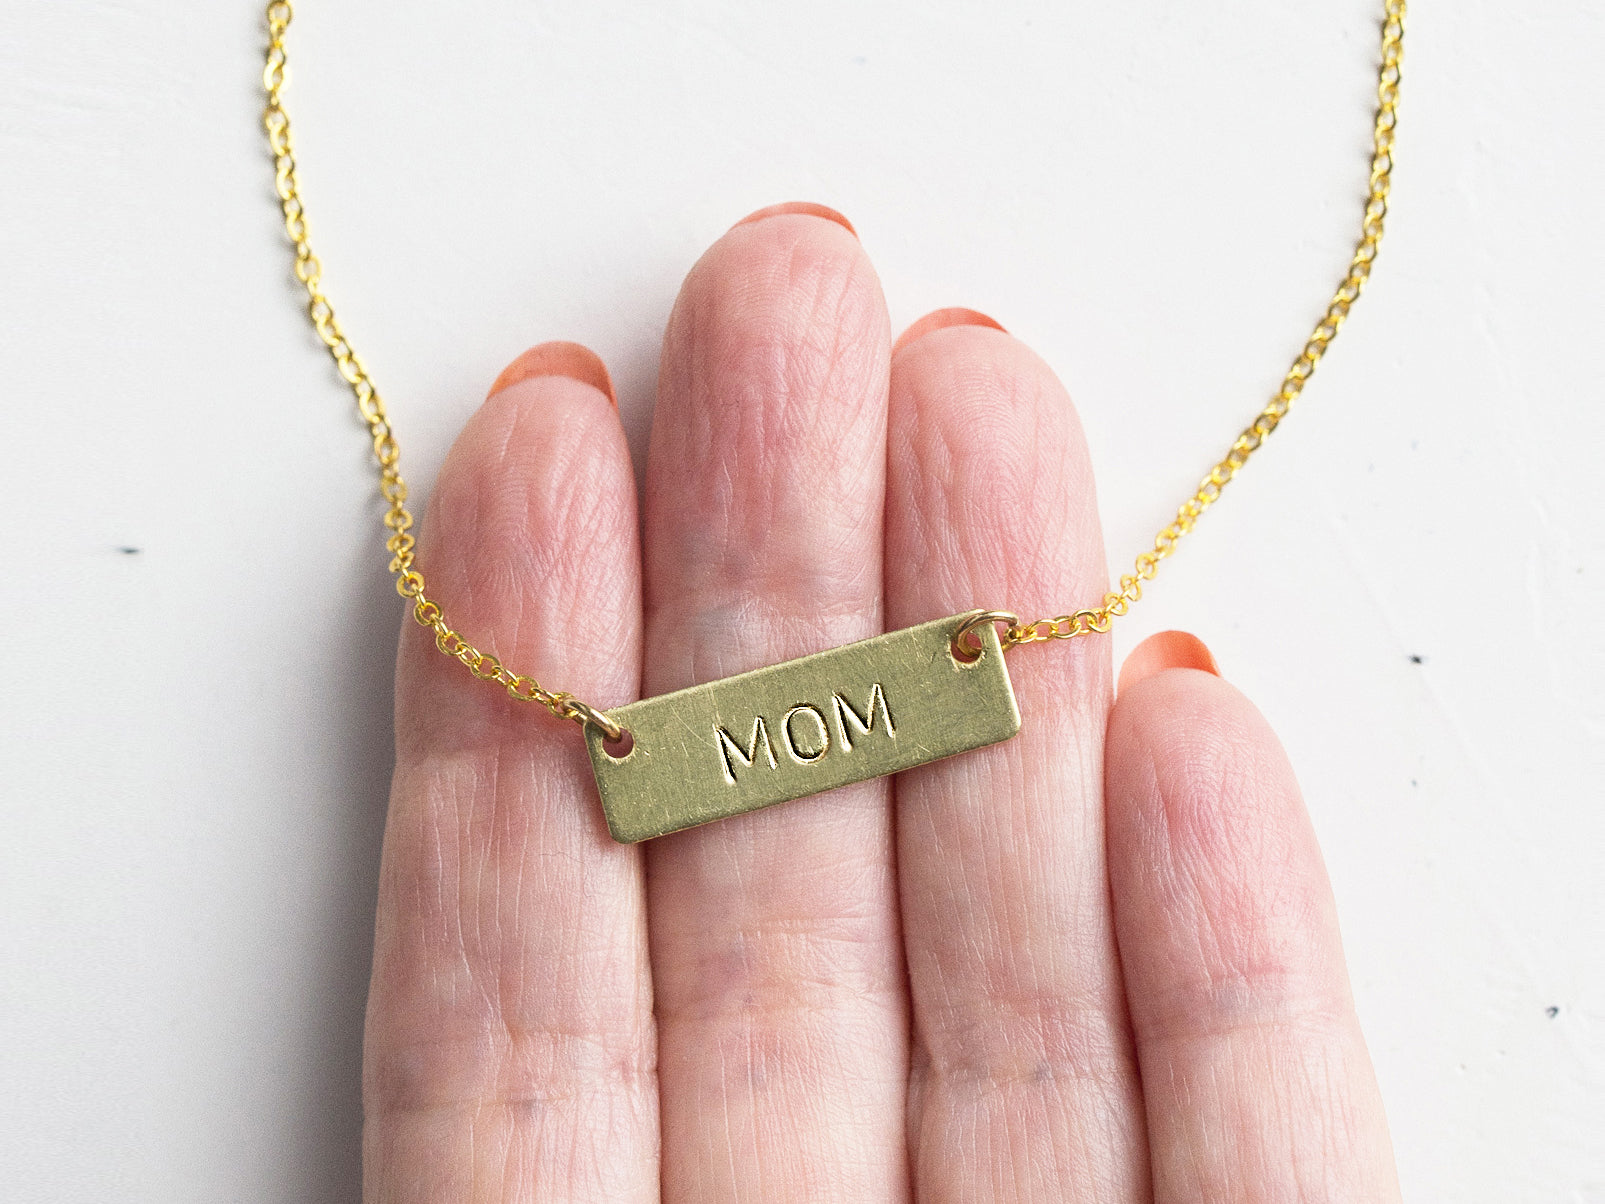 How to Make a Personalized Hand-Stamped Necklace